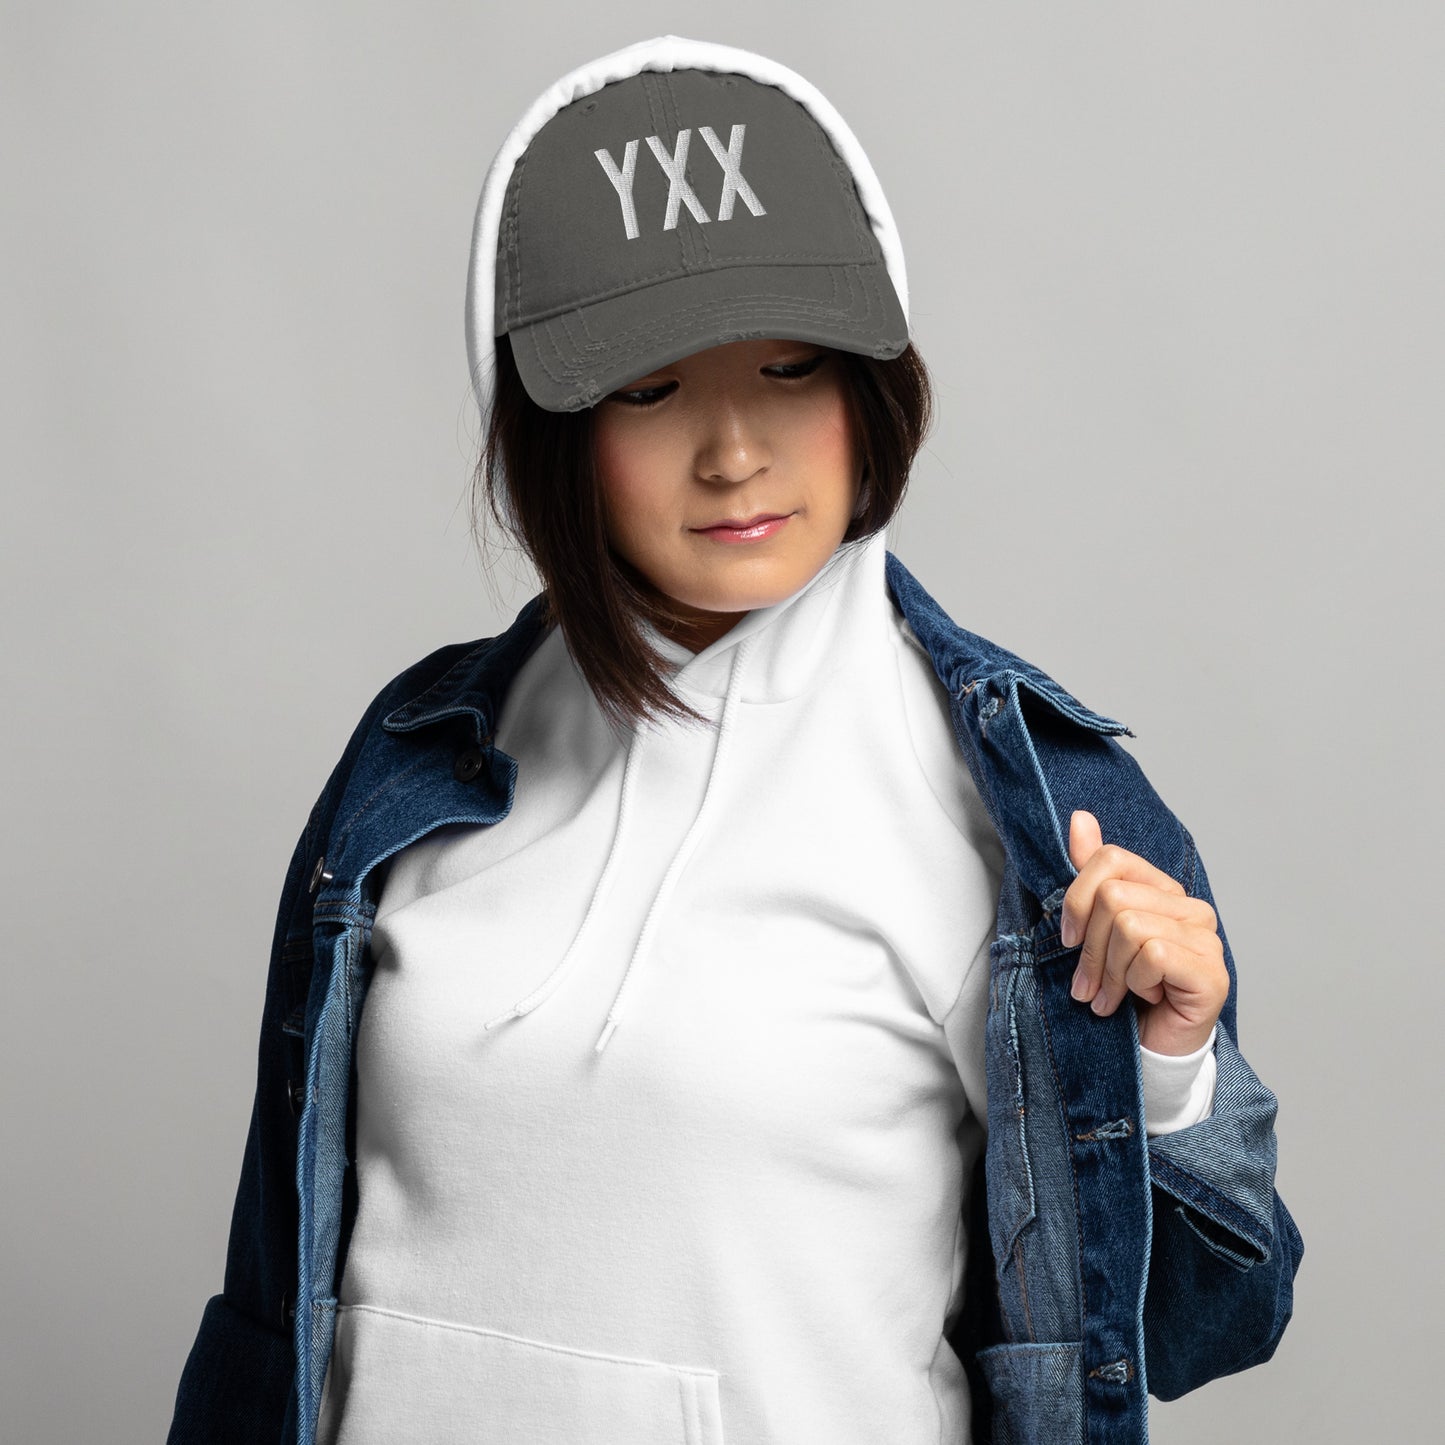 Airport Code Distressed Hat - White • YXX Abbotsford • YHM Designs - Image 06